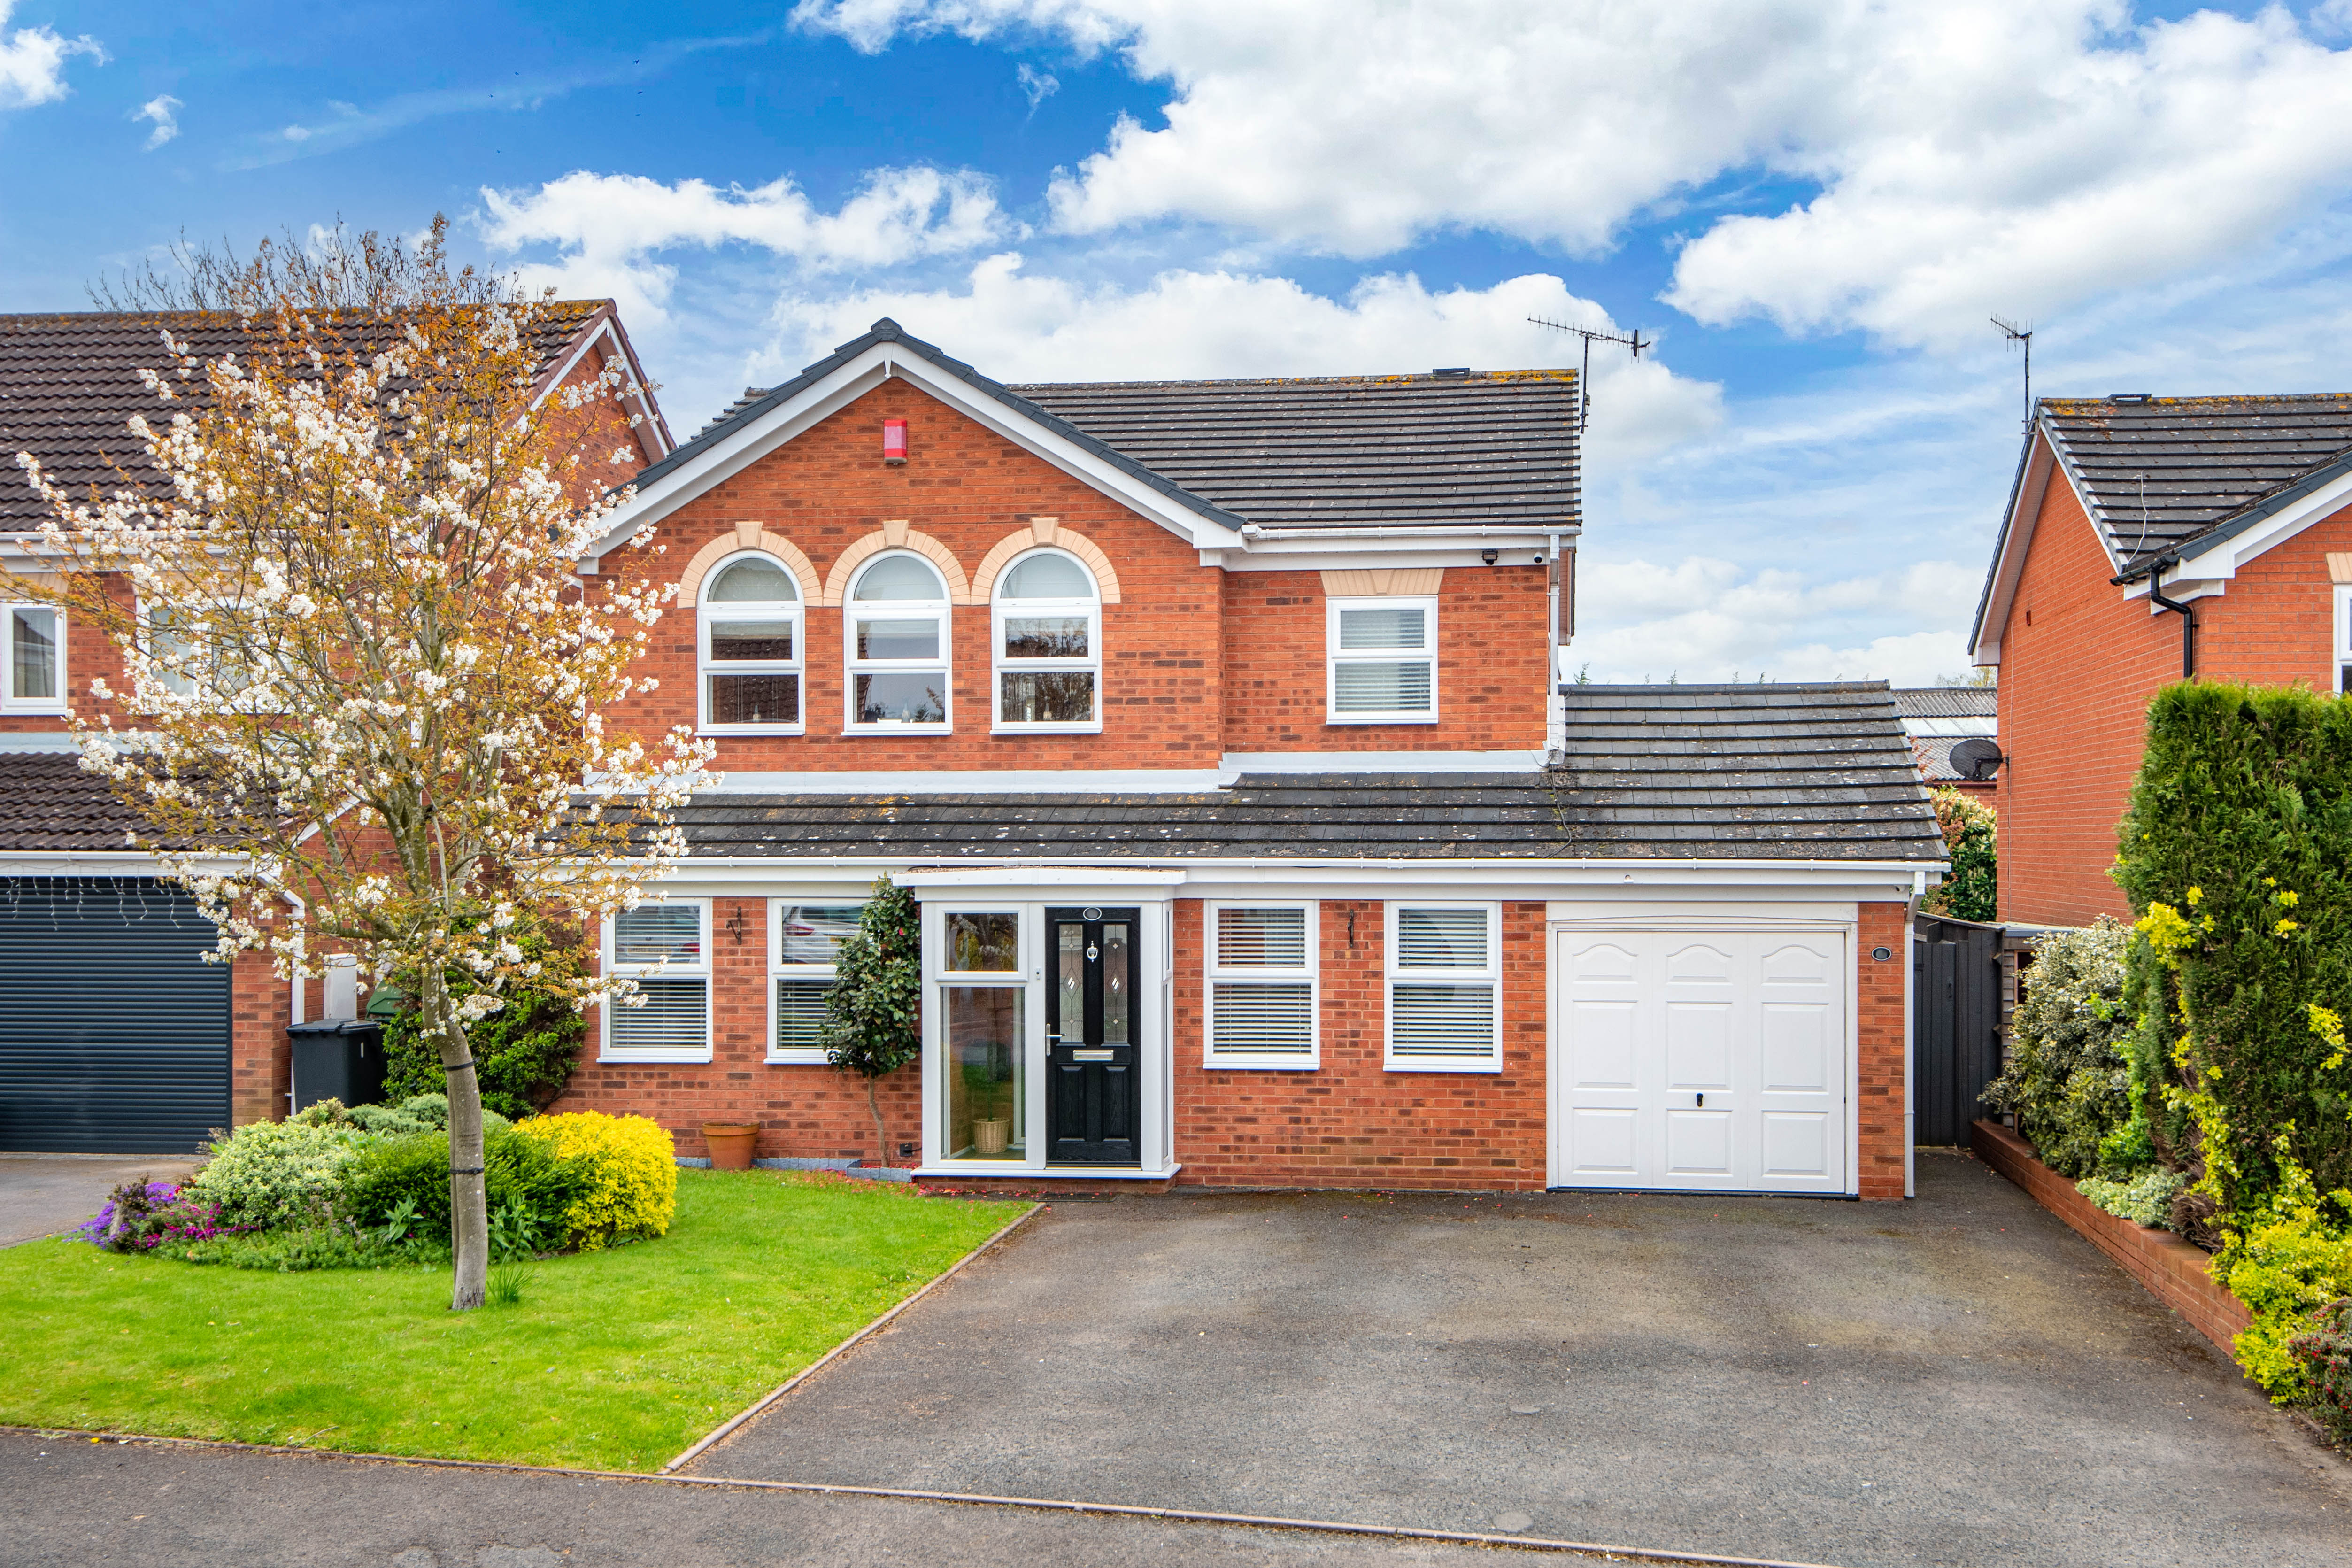 4 bed house for sale in Avoncroft Road, Stoke Heath - Property Image 1